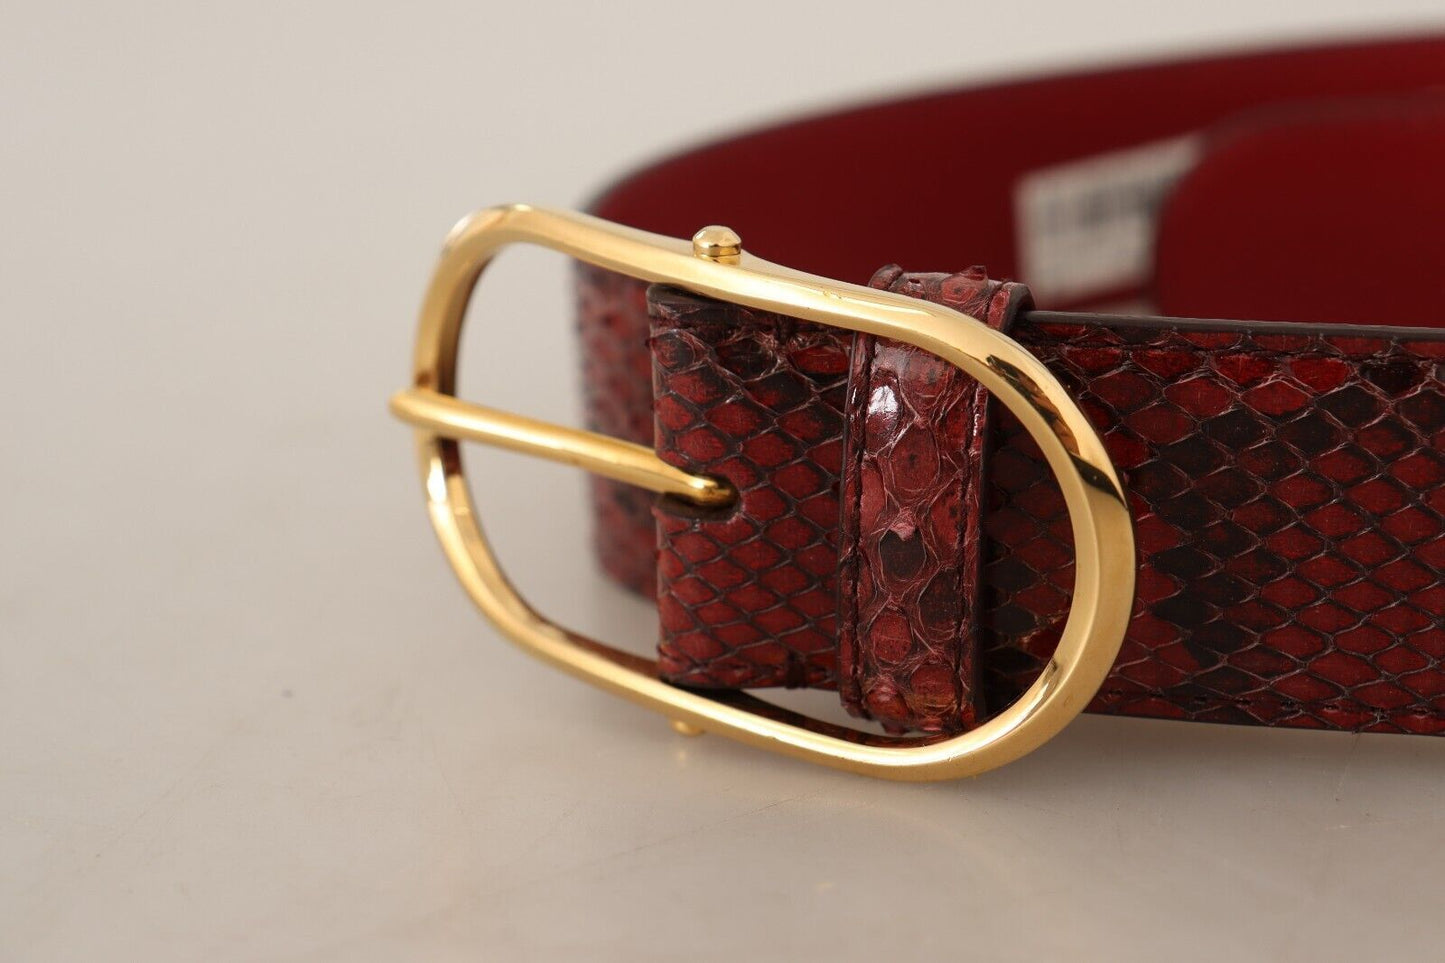 Dolce & Gabbana Red Exotic Leather Gold Oval Buckle Belt